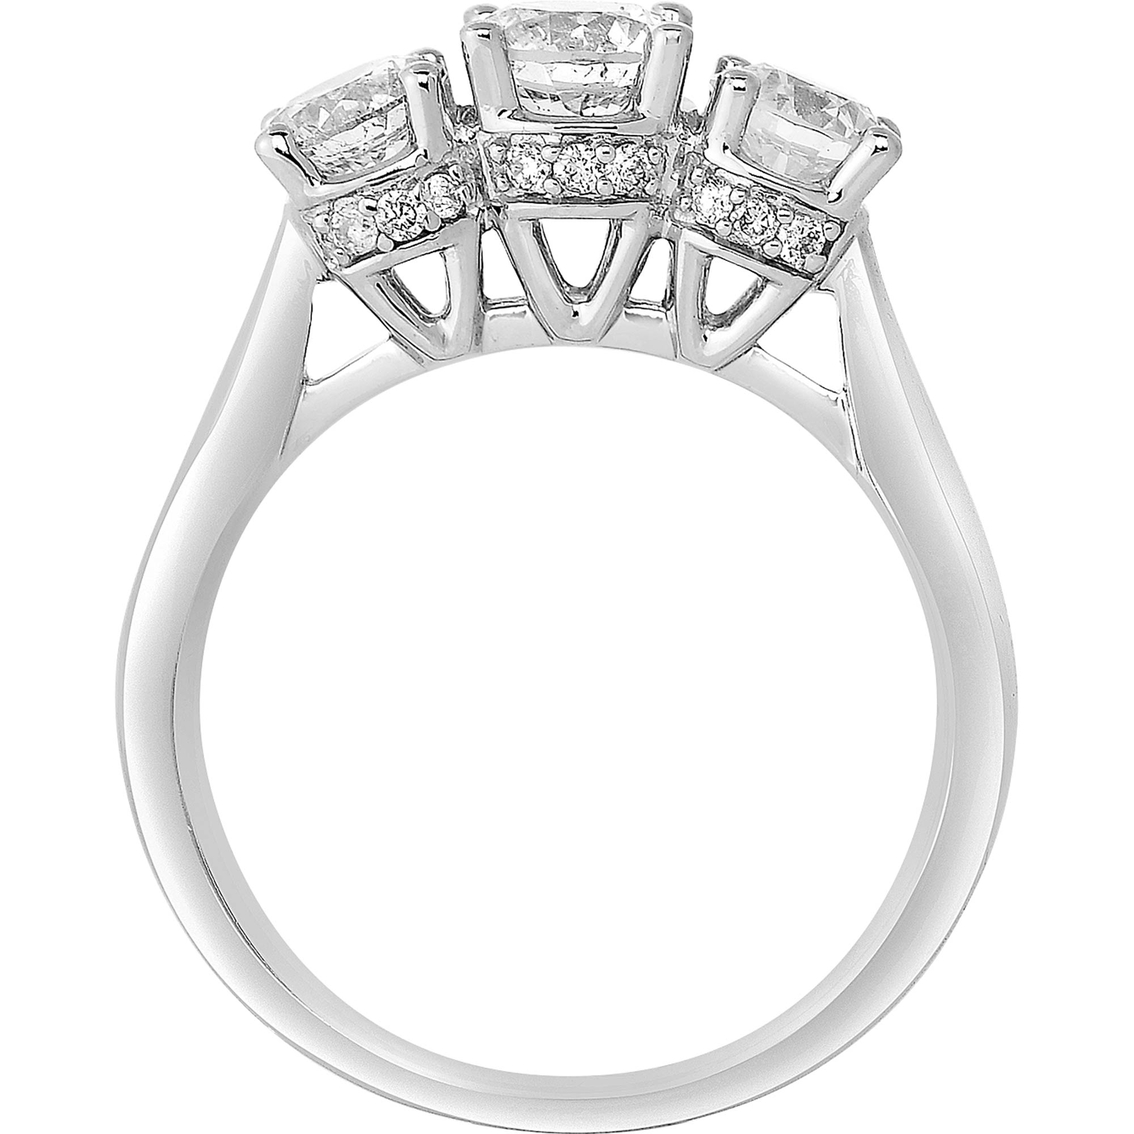 18KW Gold 1 1/2 ct. TDW 3 Stone Diamond Ring with Diamond Accents - Image 2 of 2